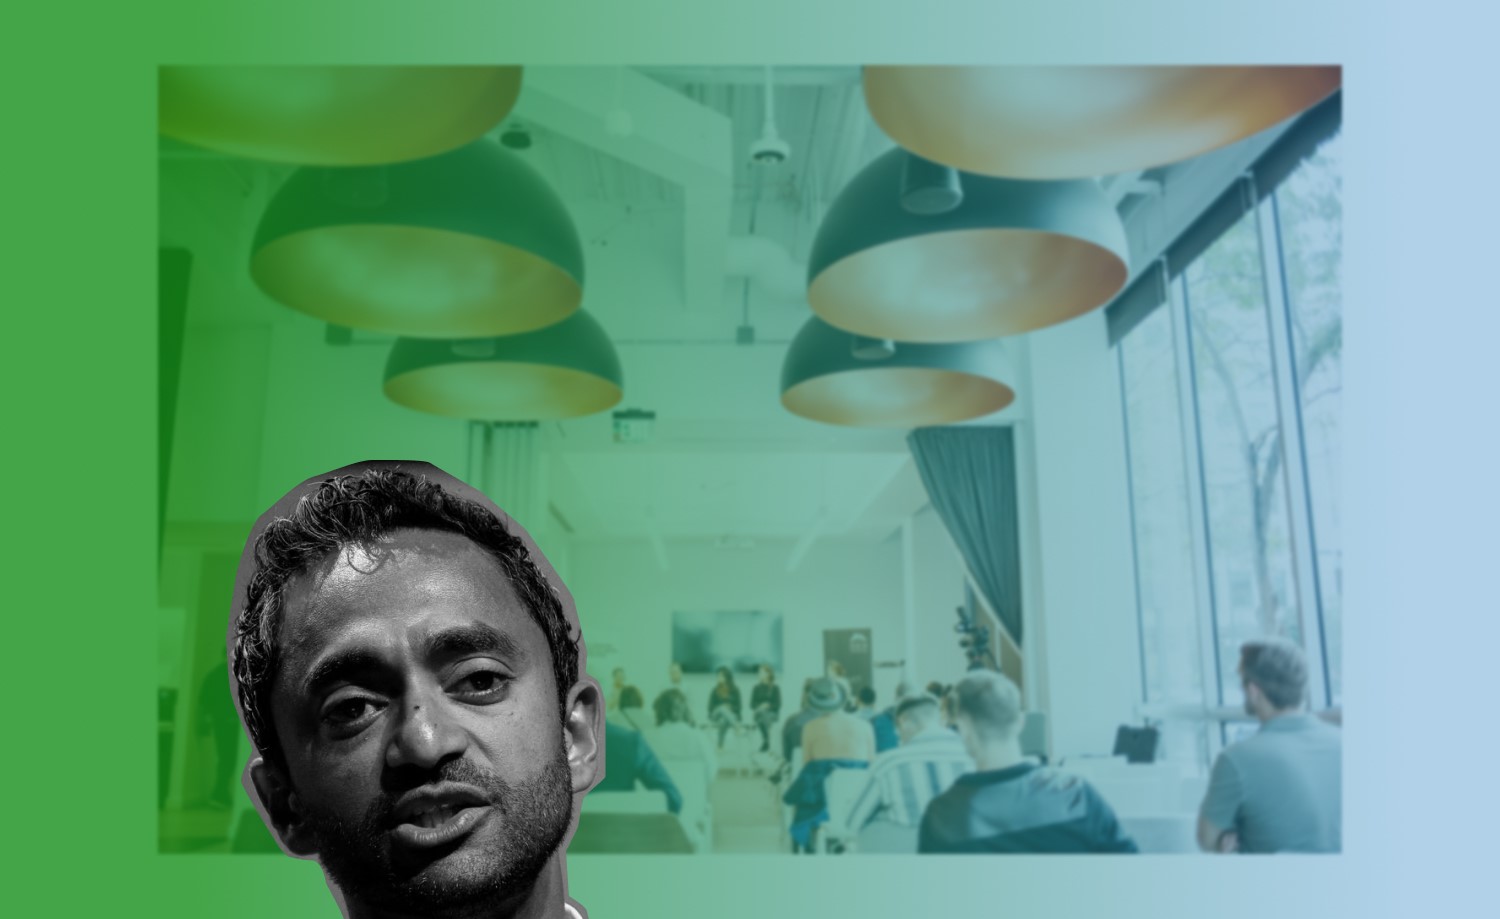 Chamath Palihapitiya speaks with audience at a meetup event